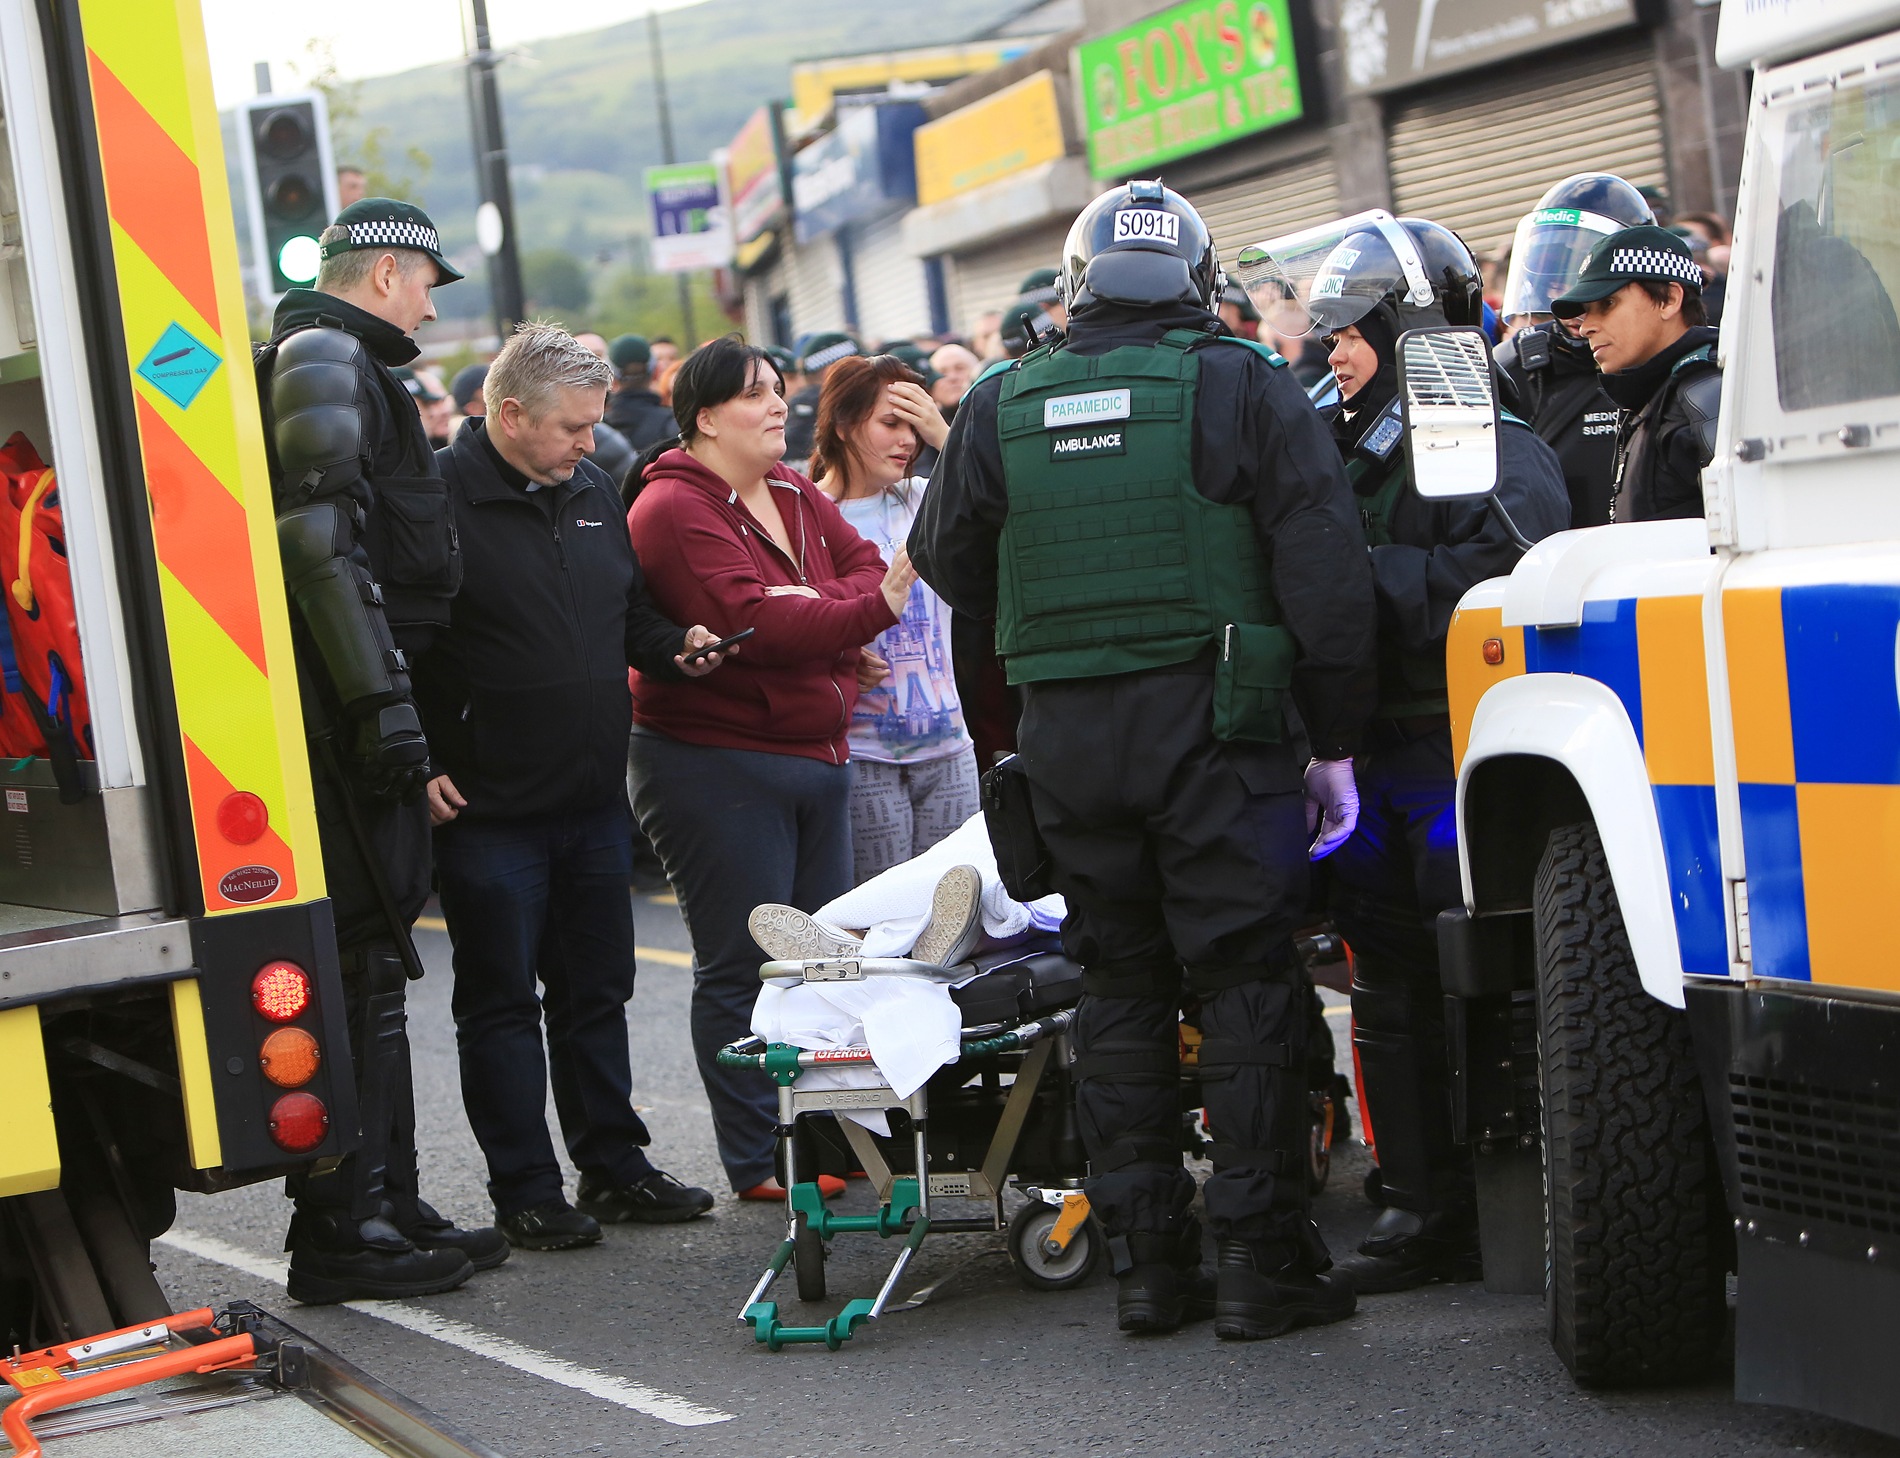 Distressed relatives look on as a 16-year-old girl is taken to an ambulance after being trapped under a car at Ardoyne yesterday. With them is Father Gary Donegan 